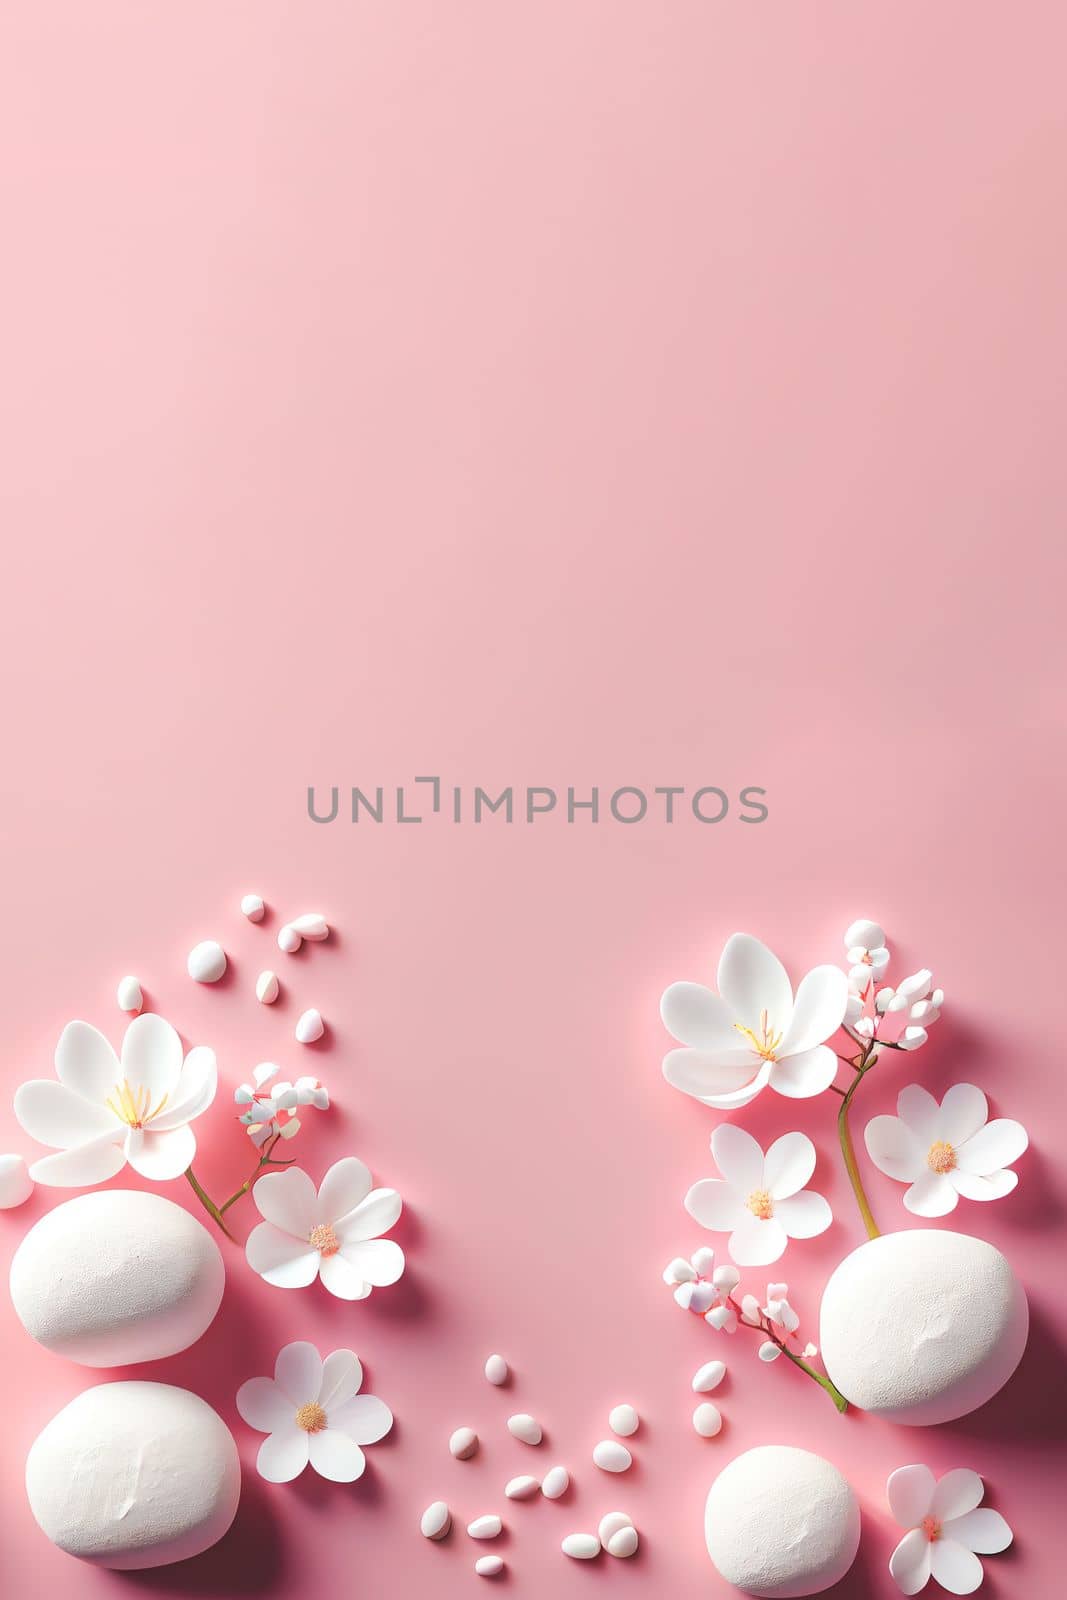 3D render of white stones with blossom flowers on pink background. Panoramic banner background with copy space.